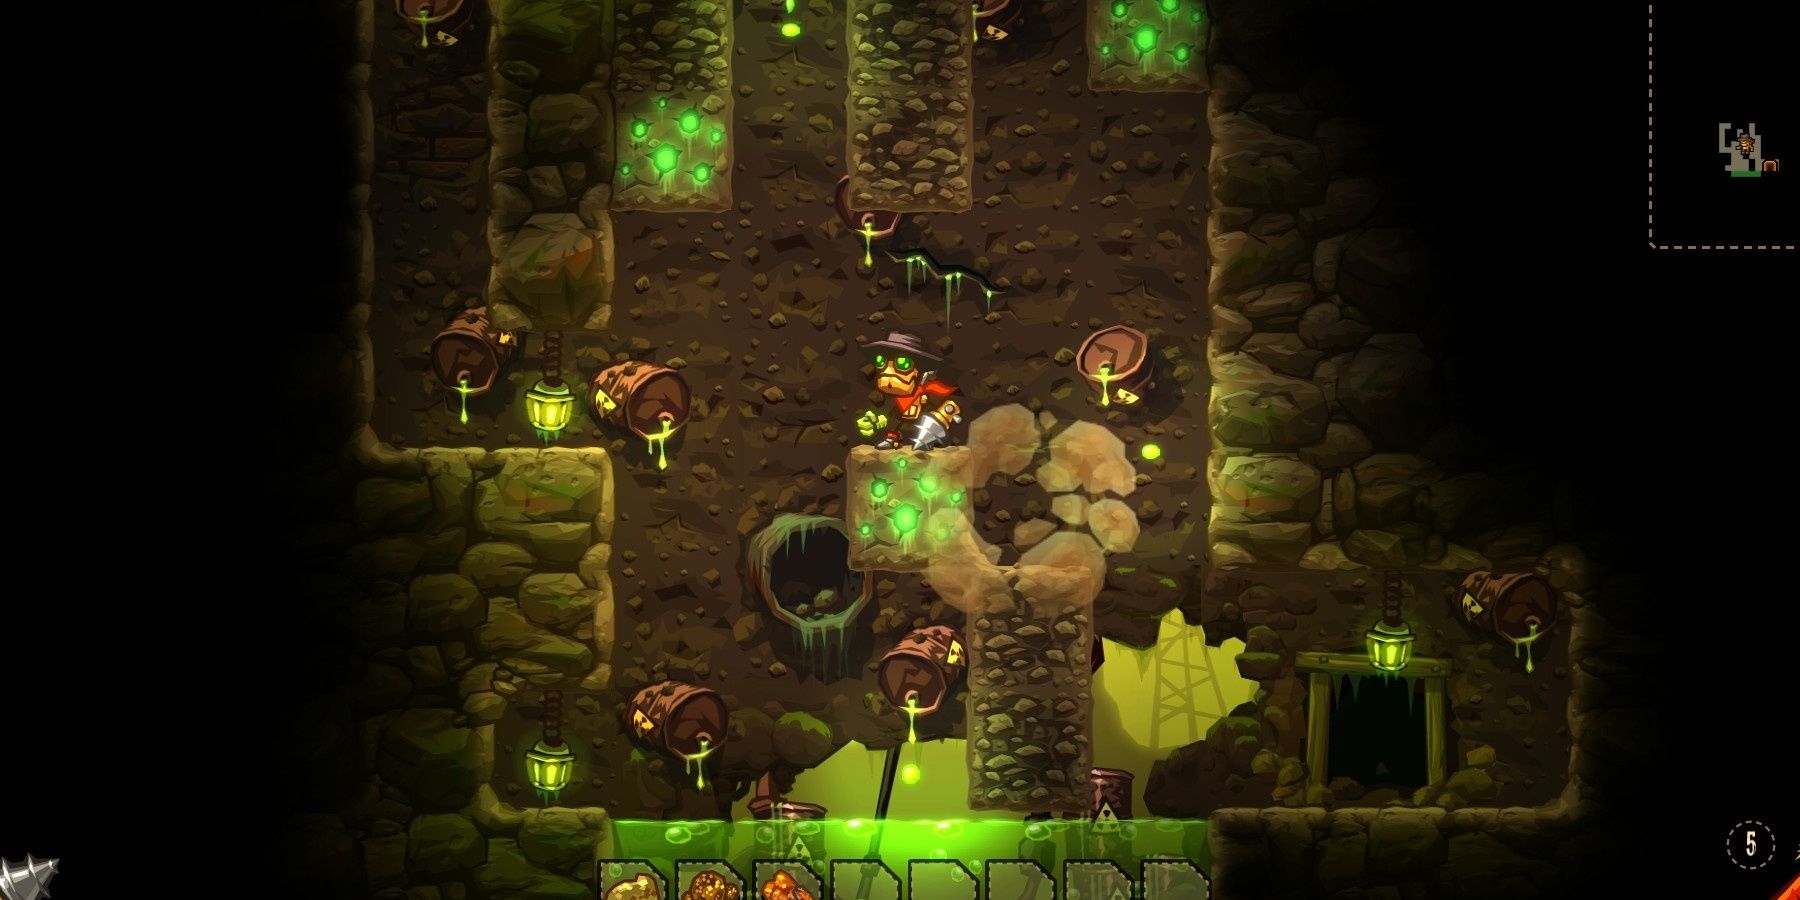 Rusty in the mines in SteamWorld Dig